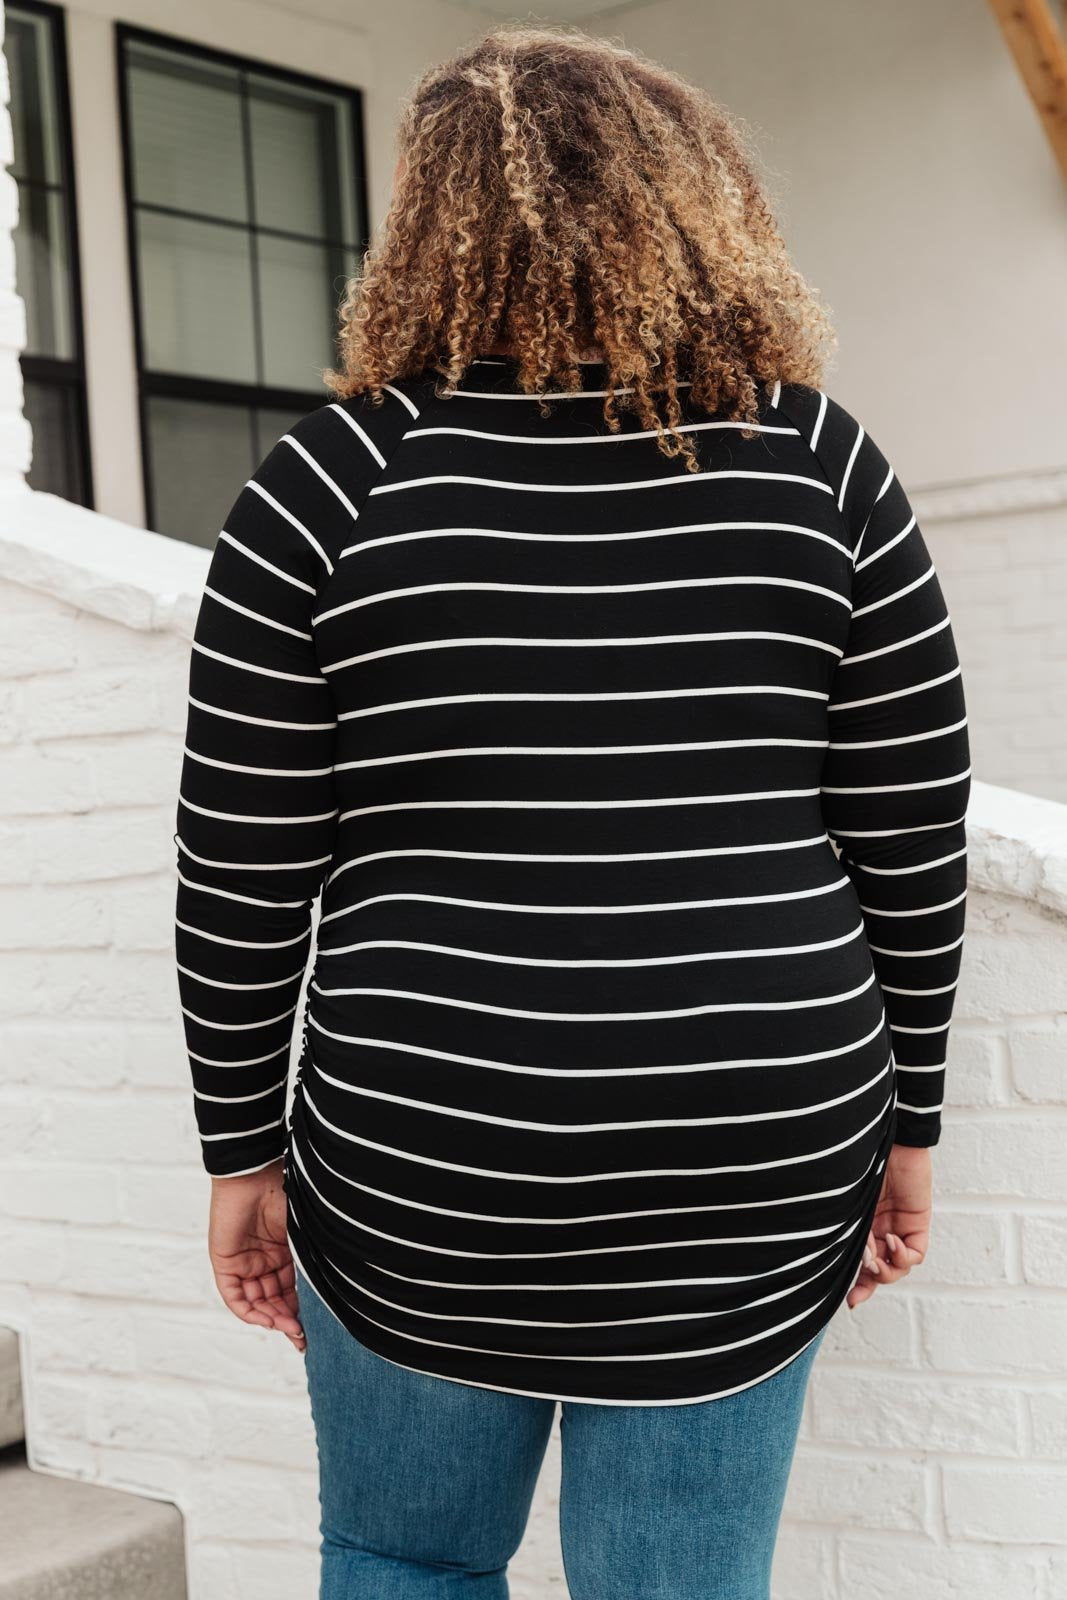 Sailing Stripes Top in Black (Online Exclusive)